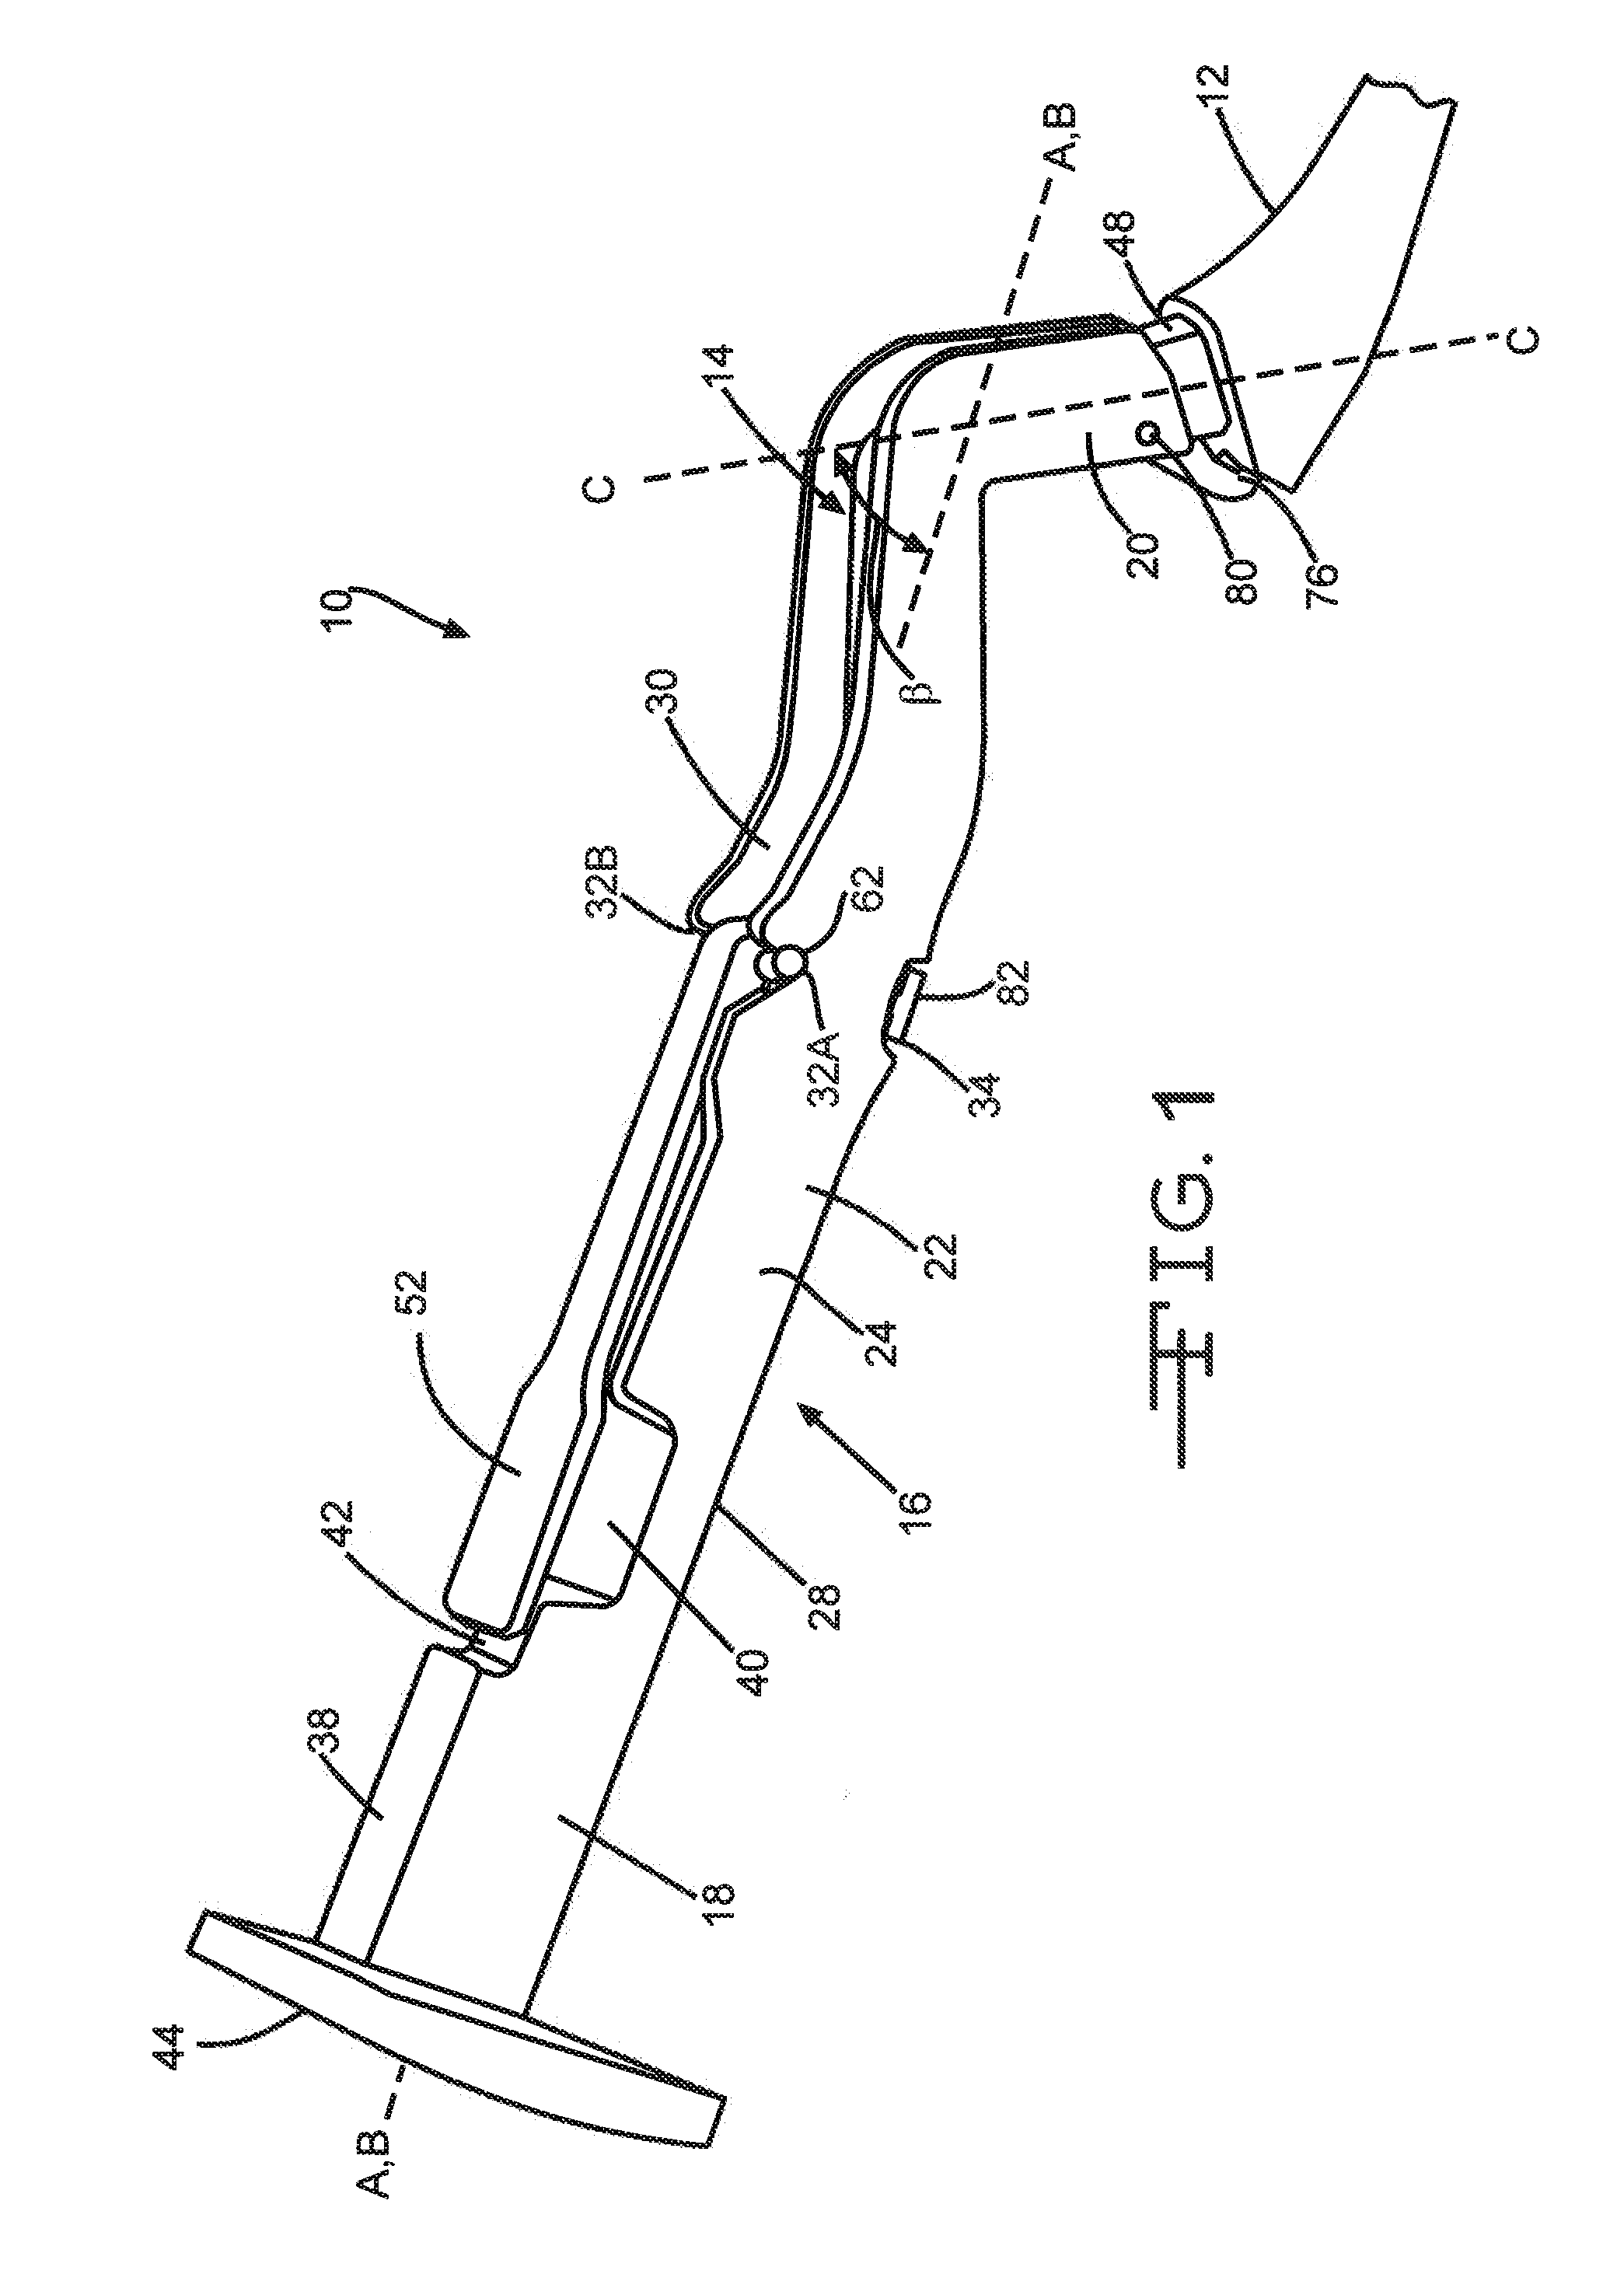 Double Offset Surgical Tool Handle Assembly To Provide Greater Offset From The Coronal Plane